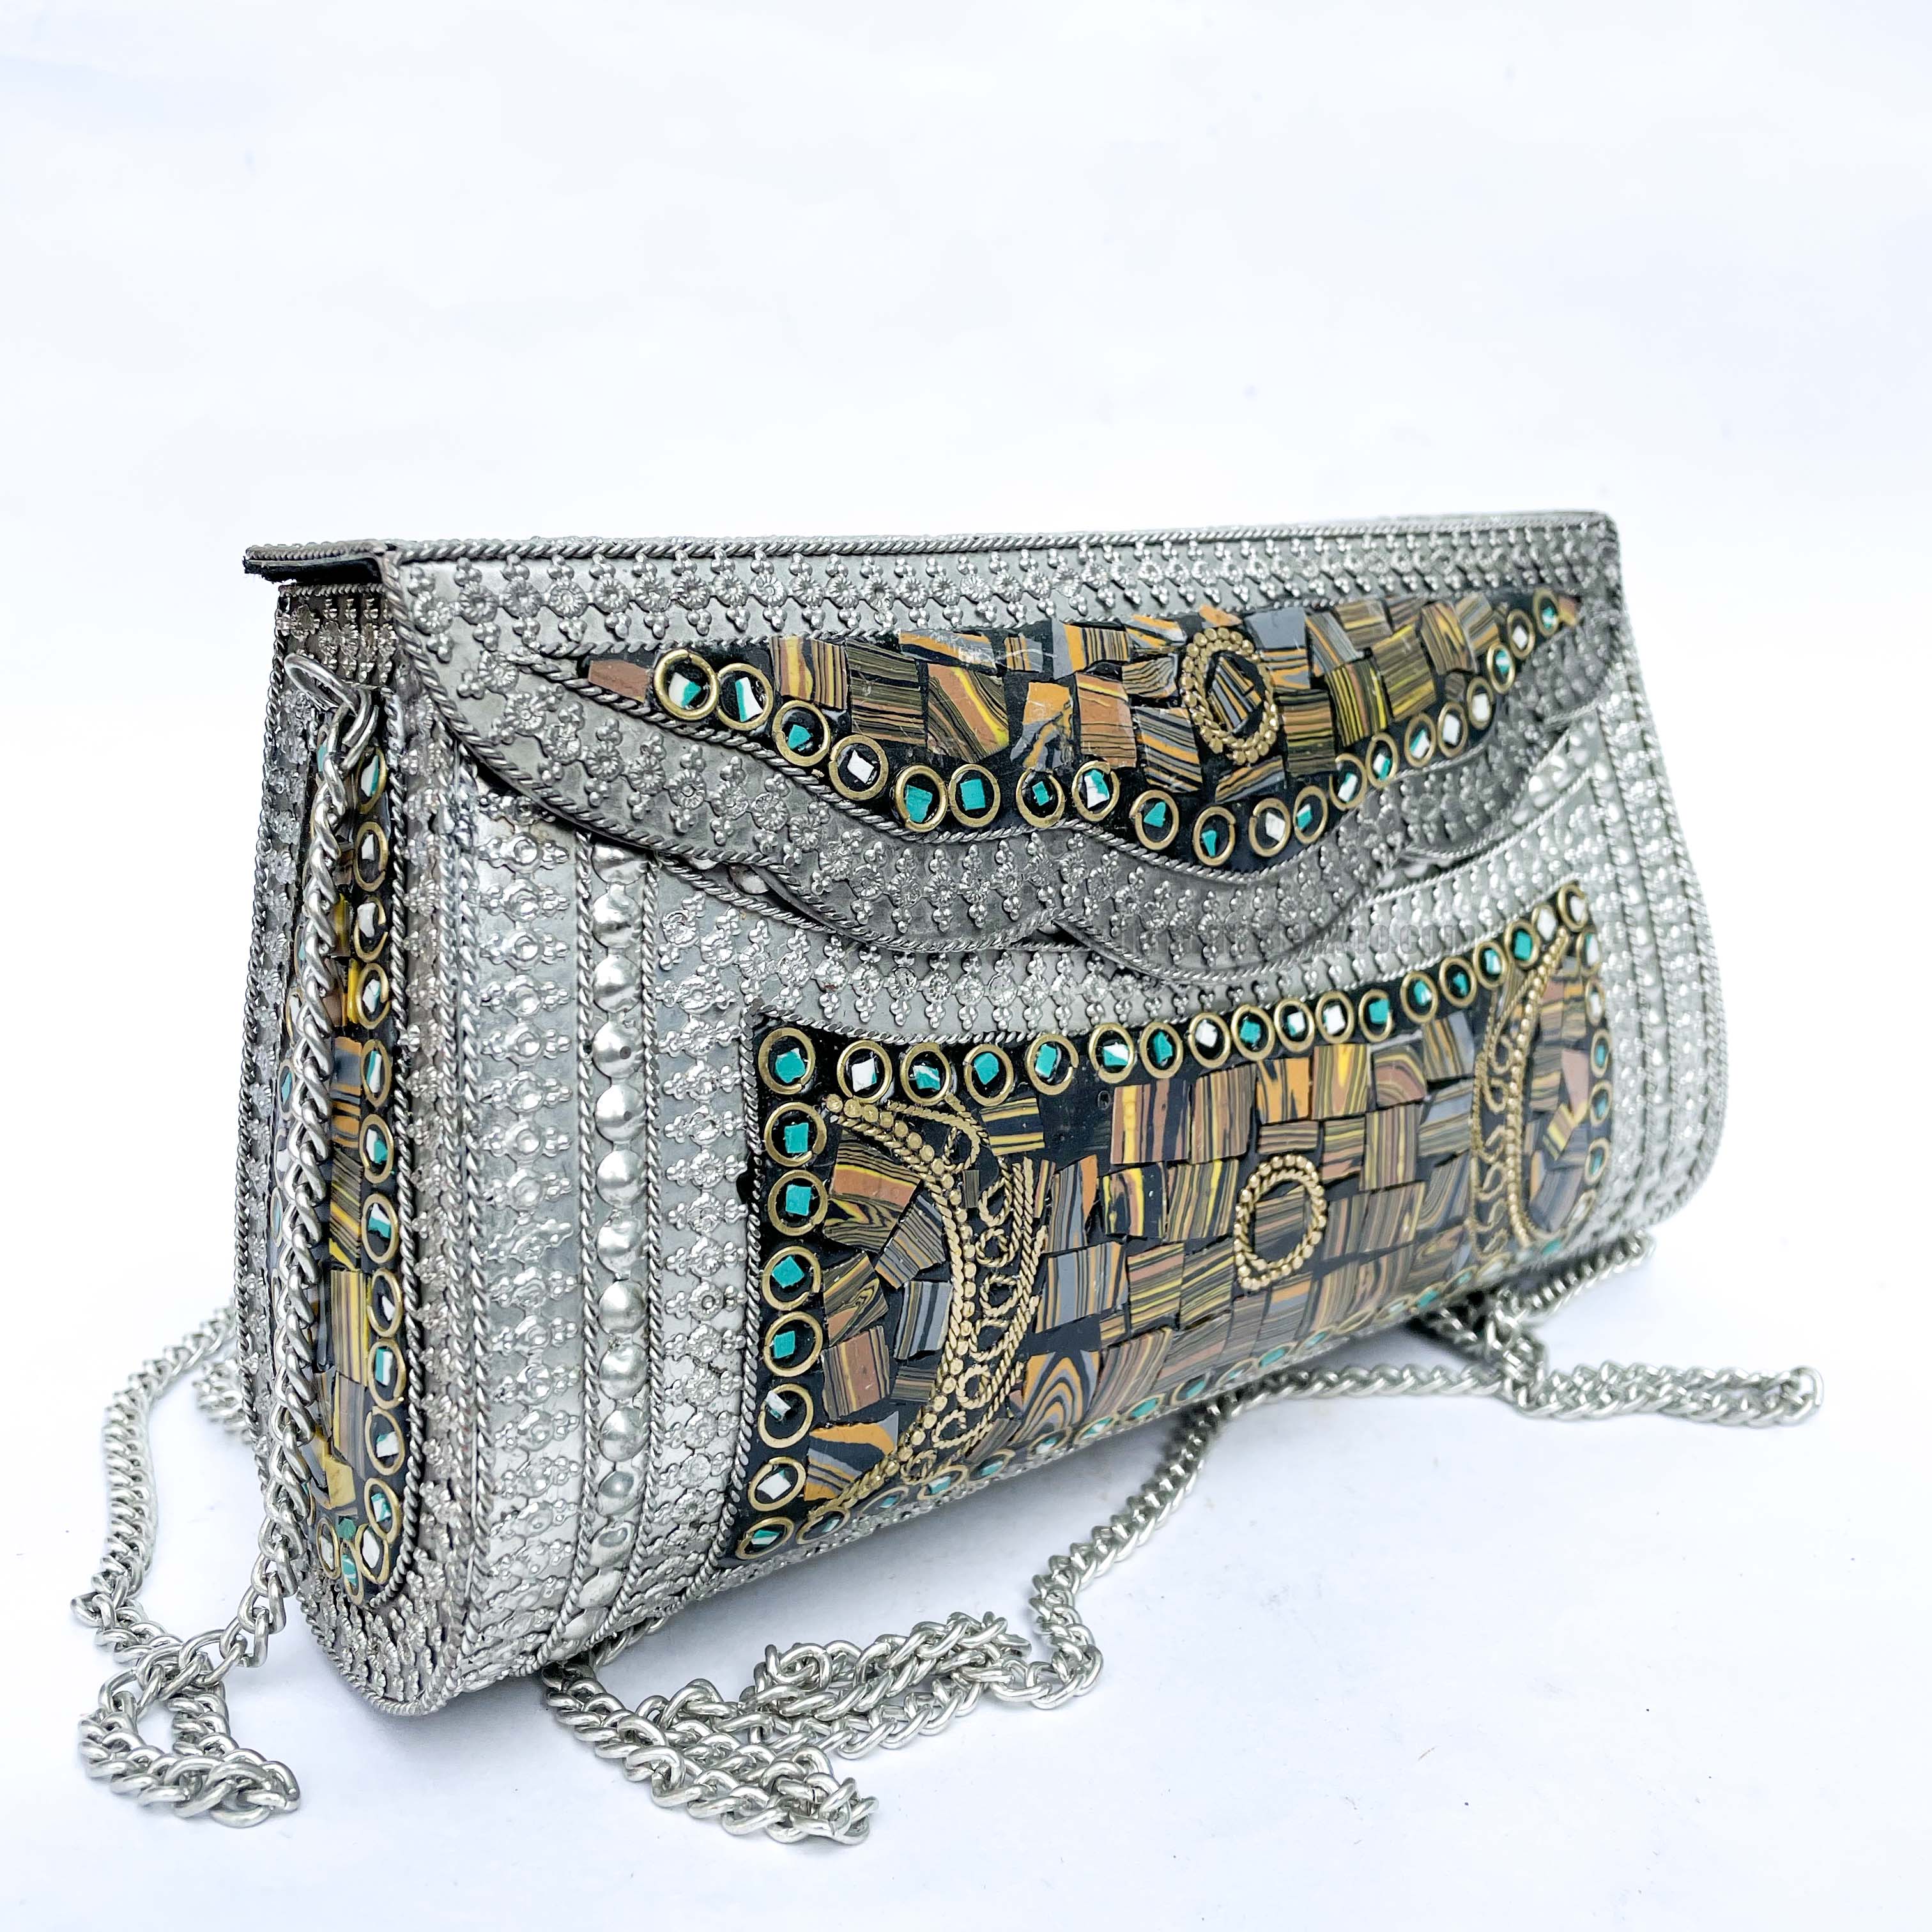 Nepali Handmade Large Size Ladies Bag With stone Setting, metal, silver Color